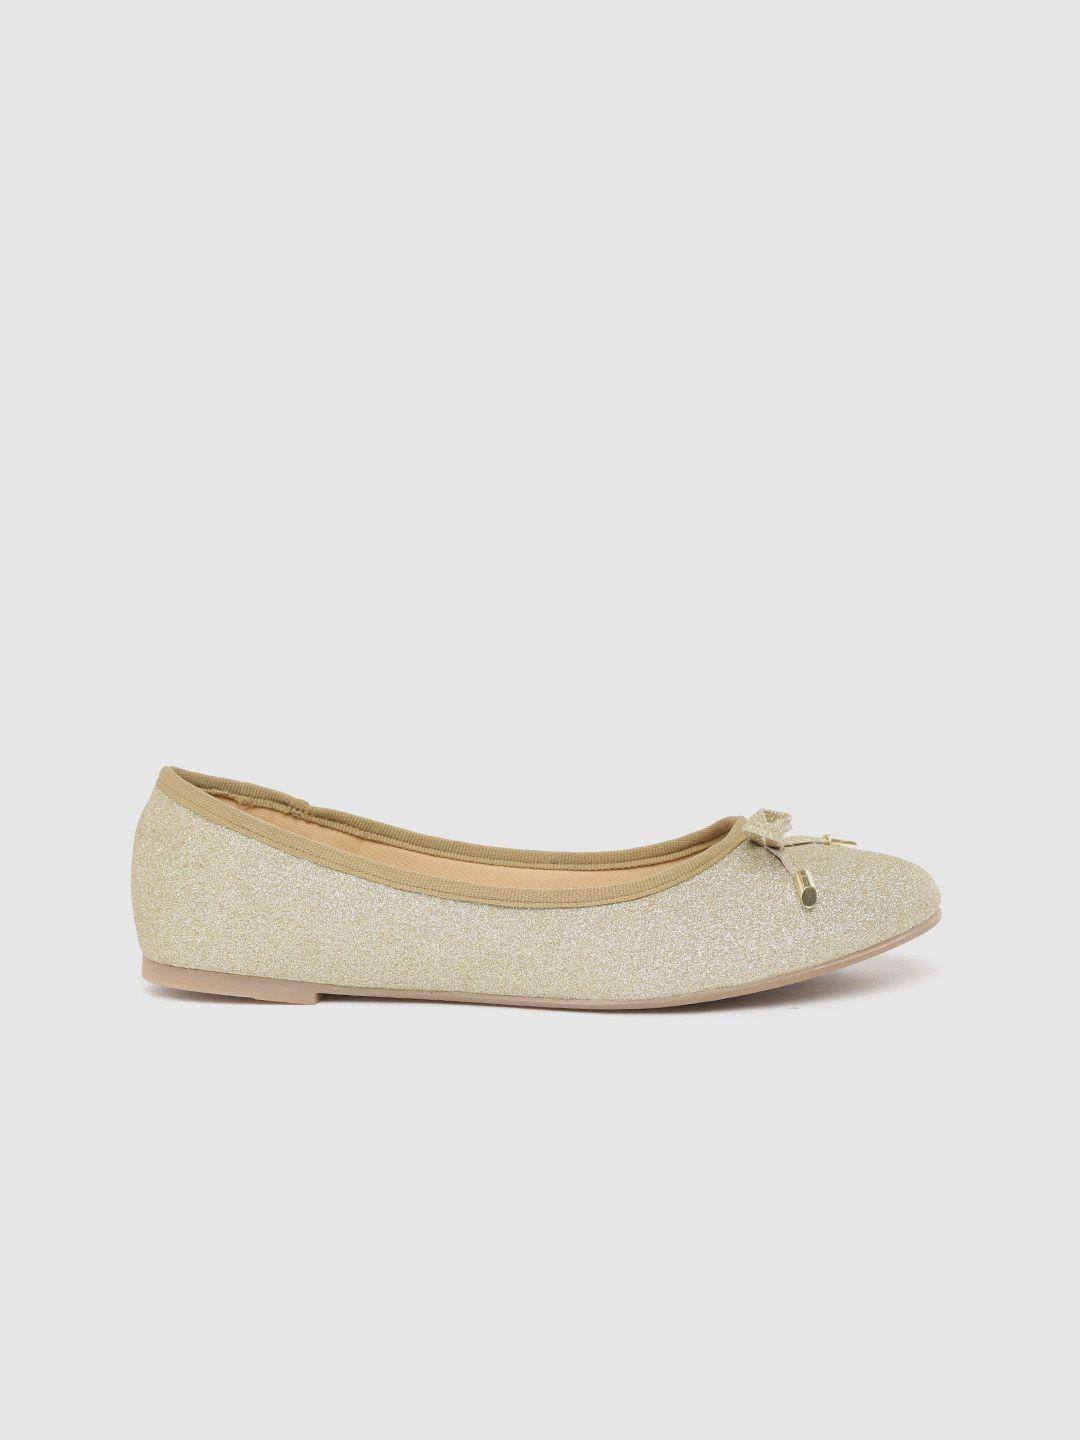 carlton london women gold-toned shimmer ballerinas with bow detail